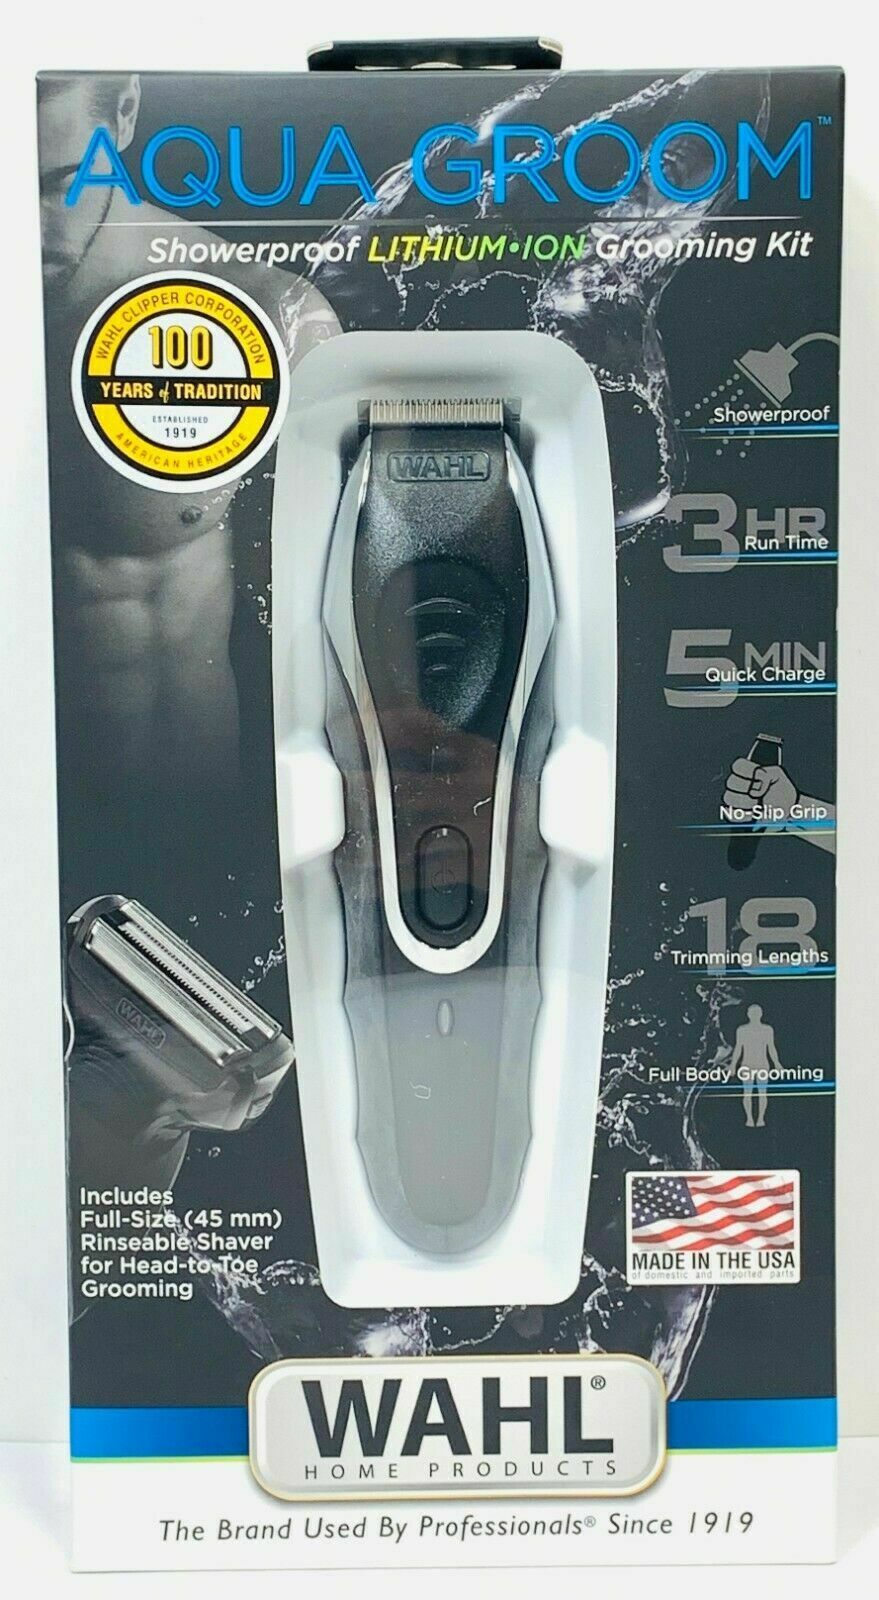 wahl rechargeable hair clipper kit